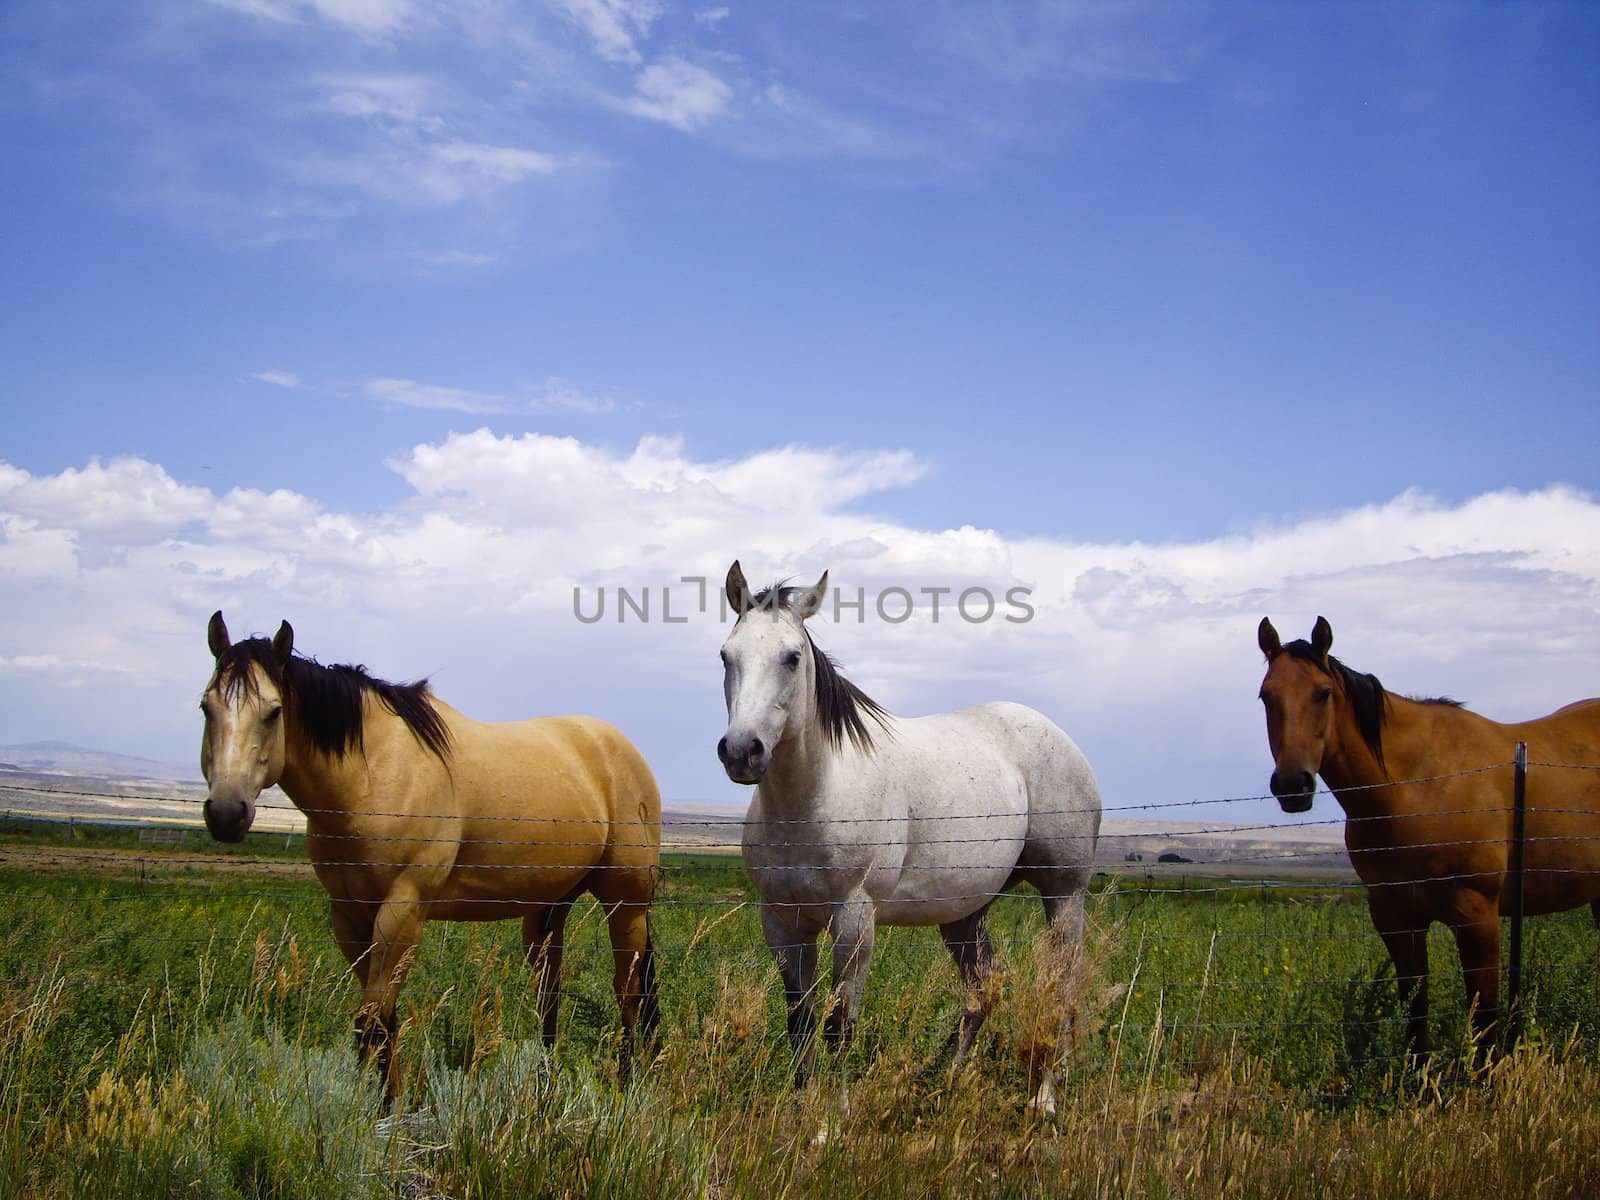 Horses of a different color by emattil